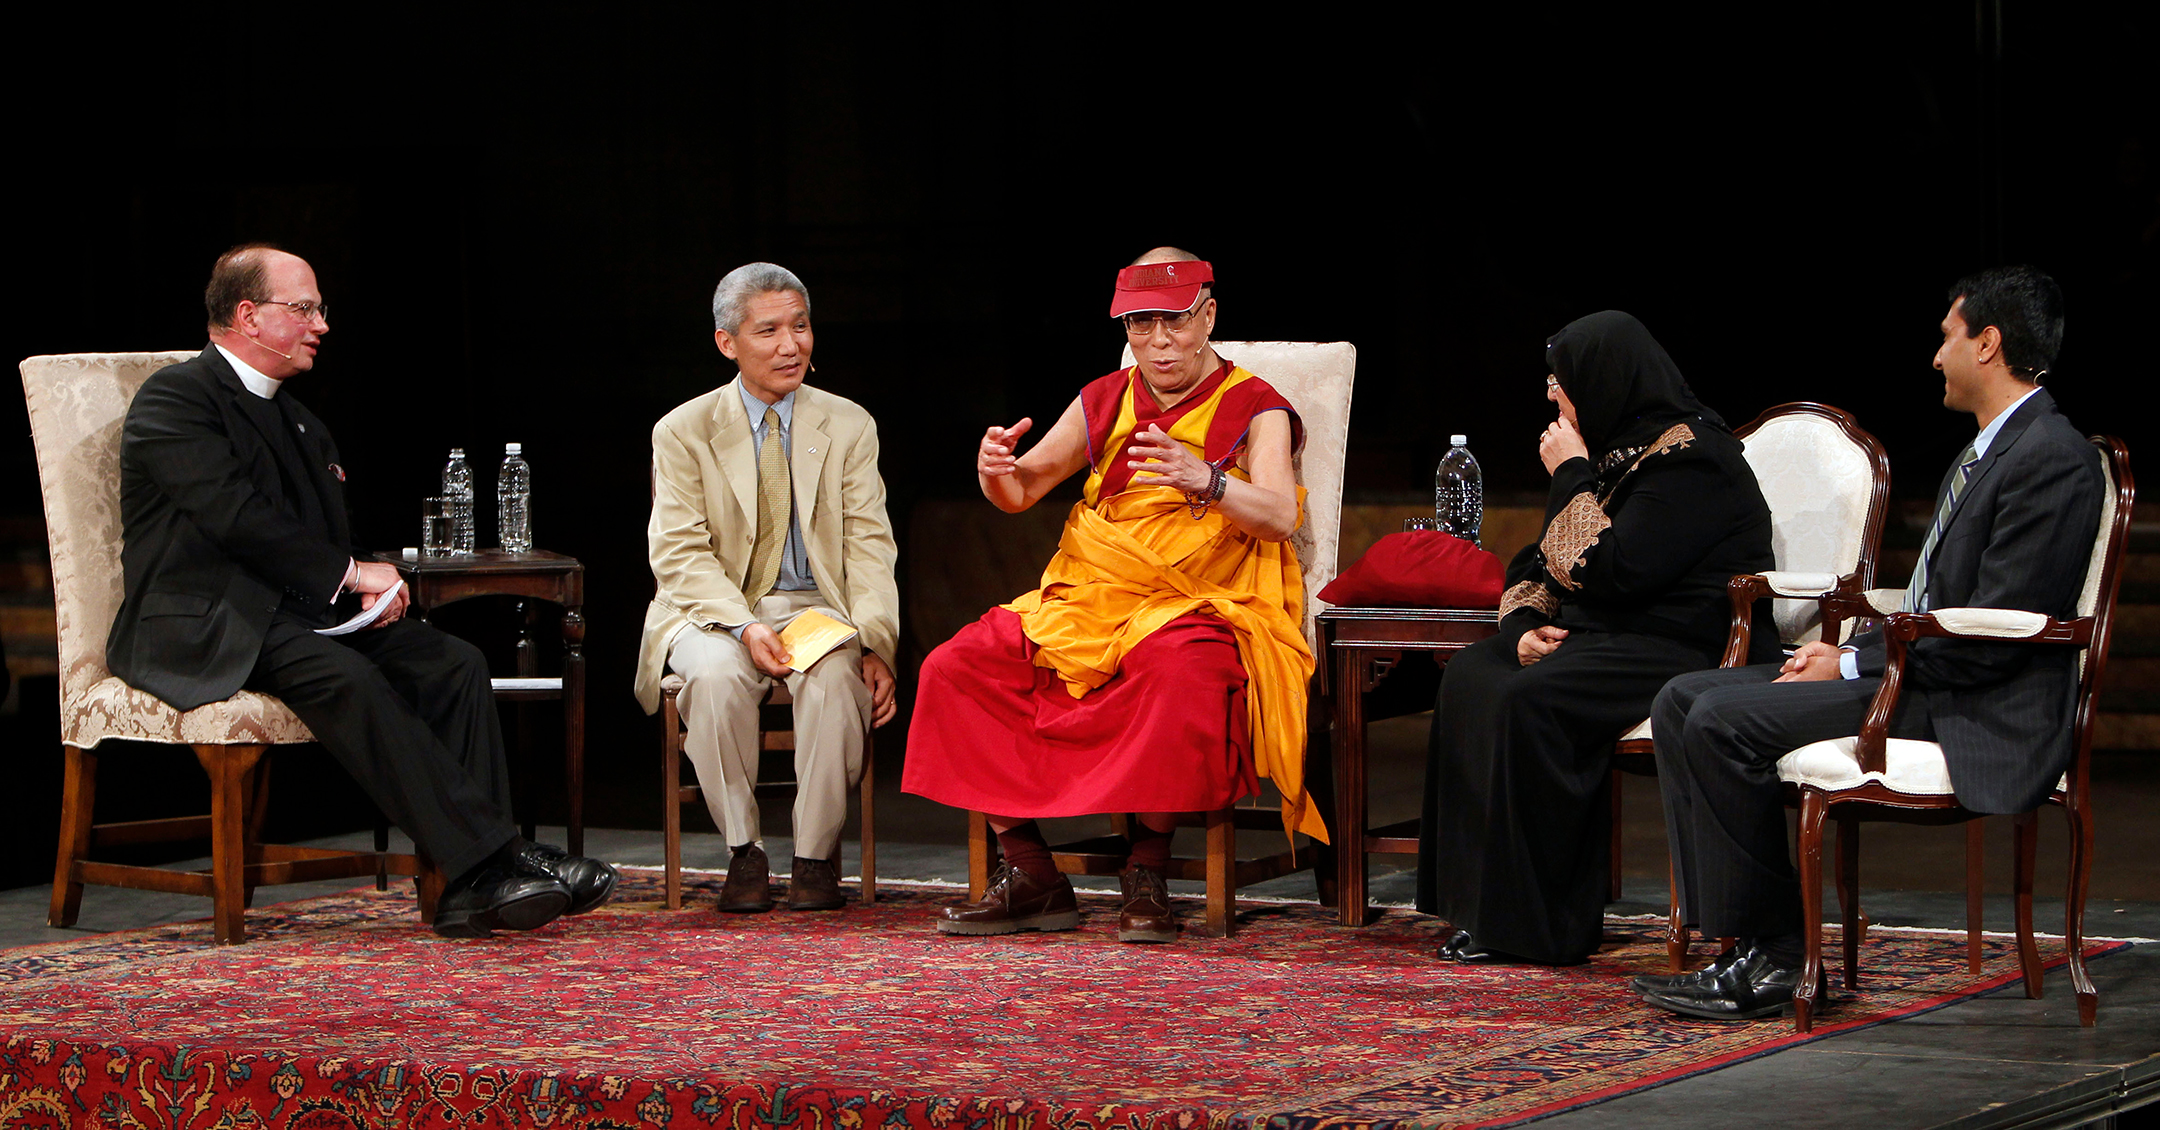 Five people sitting in chairs on a stage listening to the person in the middle who is speaking